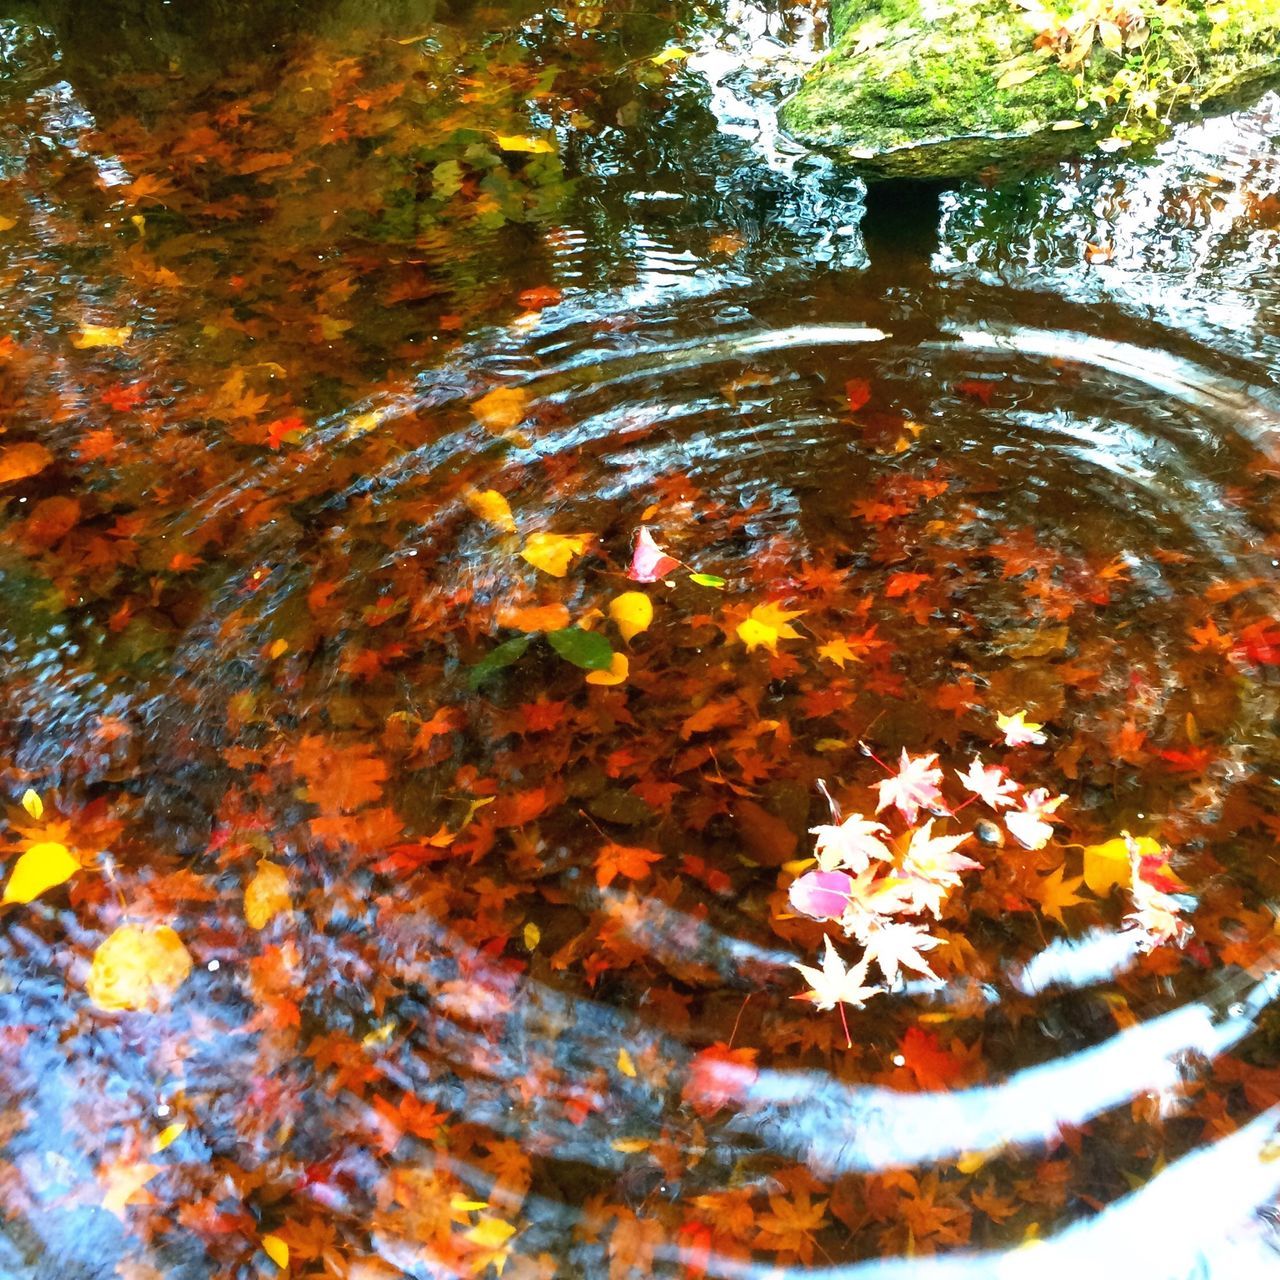 water, autumn, leaf, nature, change, high angle view, reflection, tree, pond, beauty in nature, outdoors, orange color, day, rock - object, close-up, no people, tranquility, waterfront, rippled, floating on water